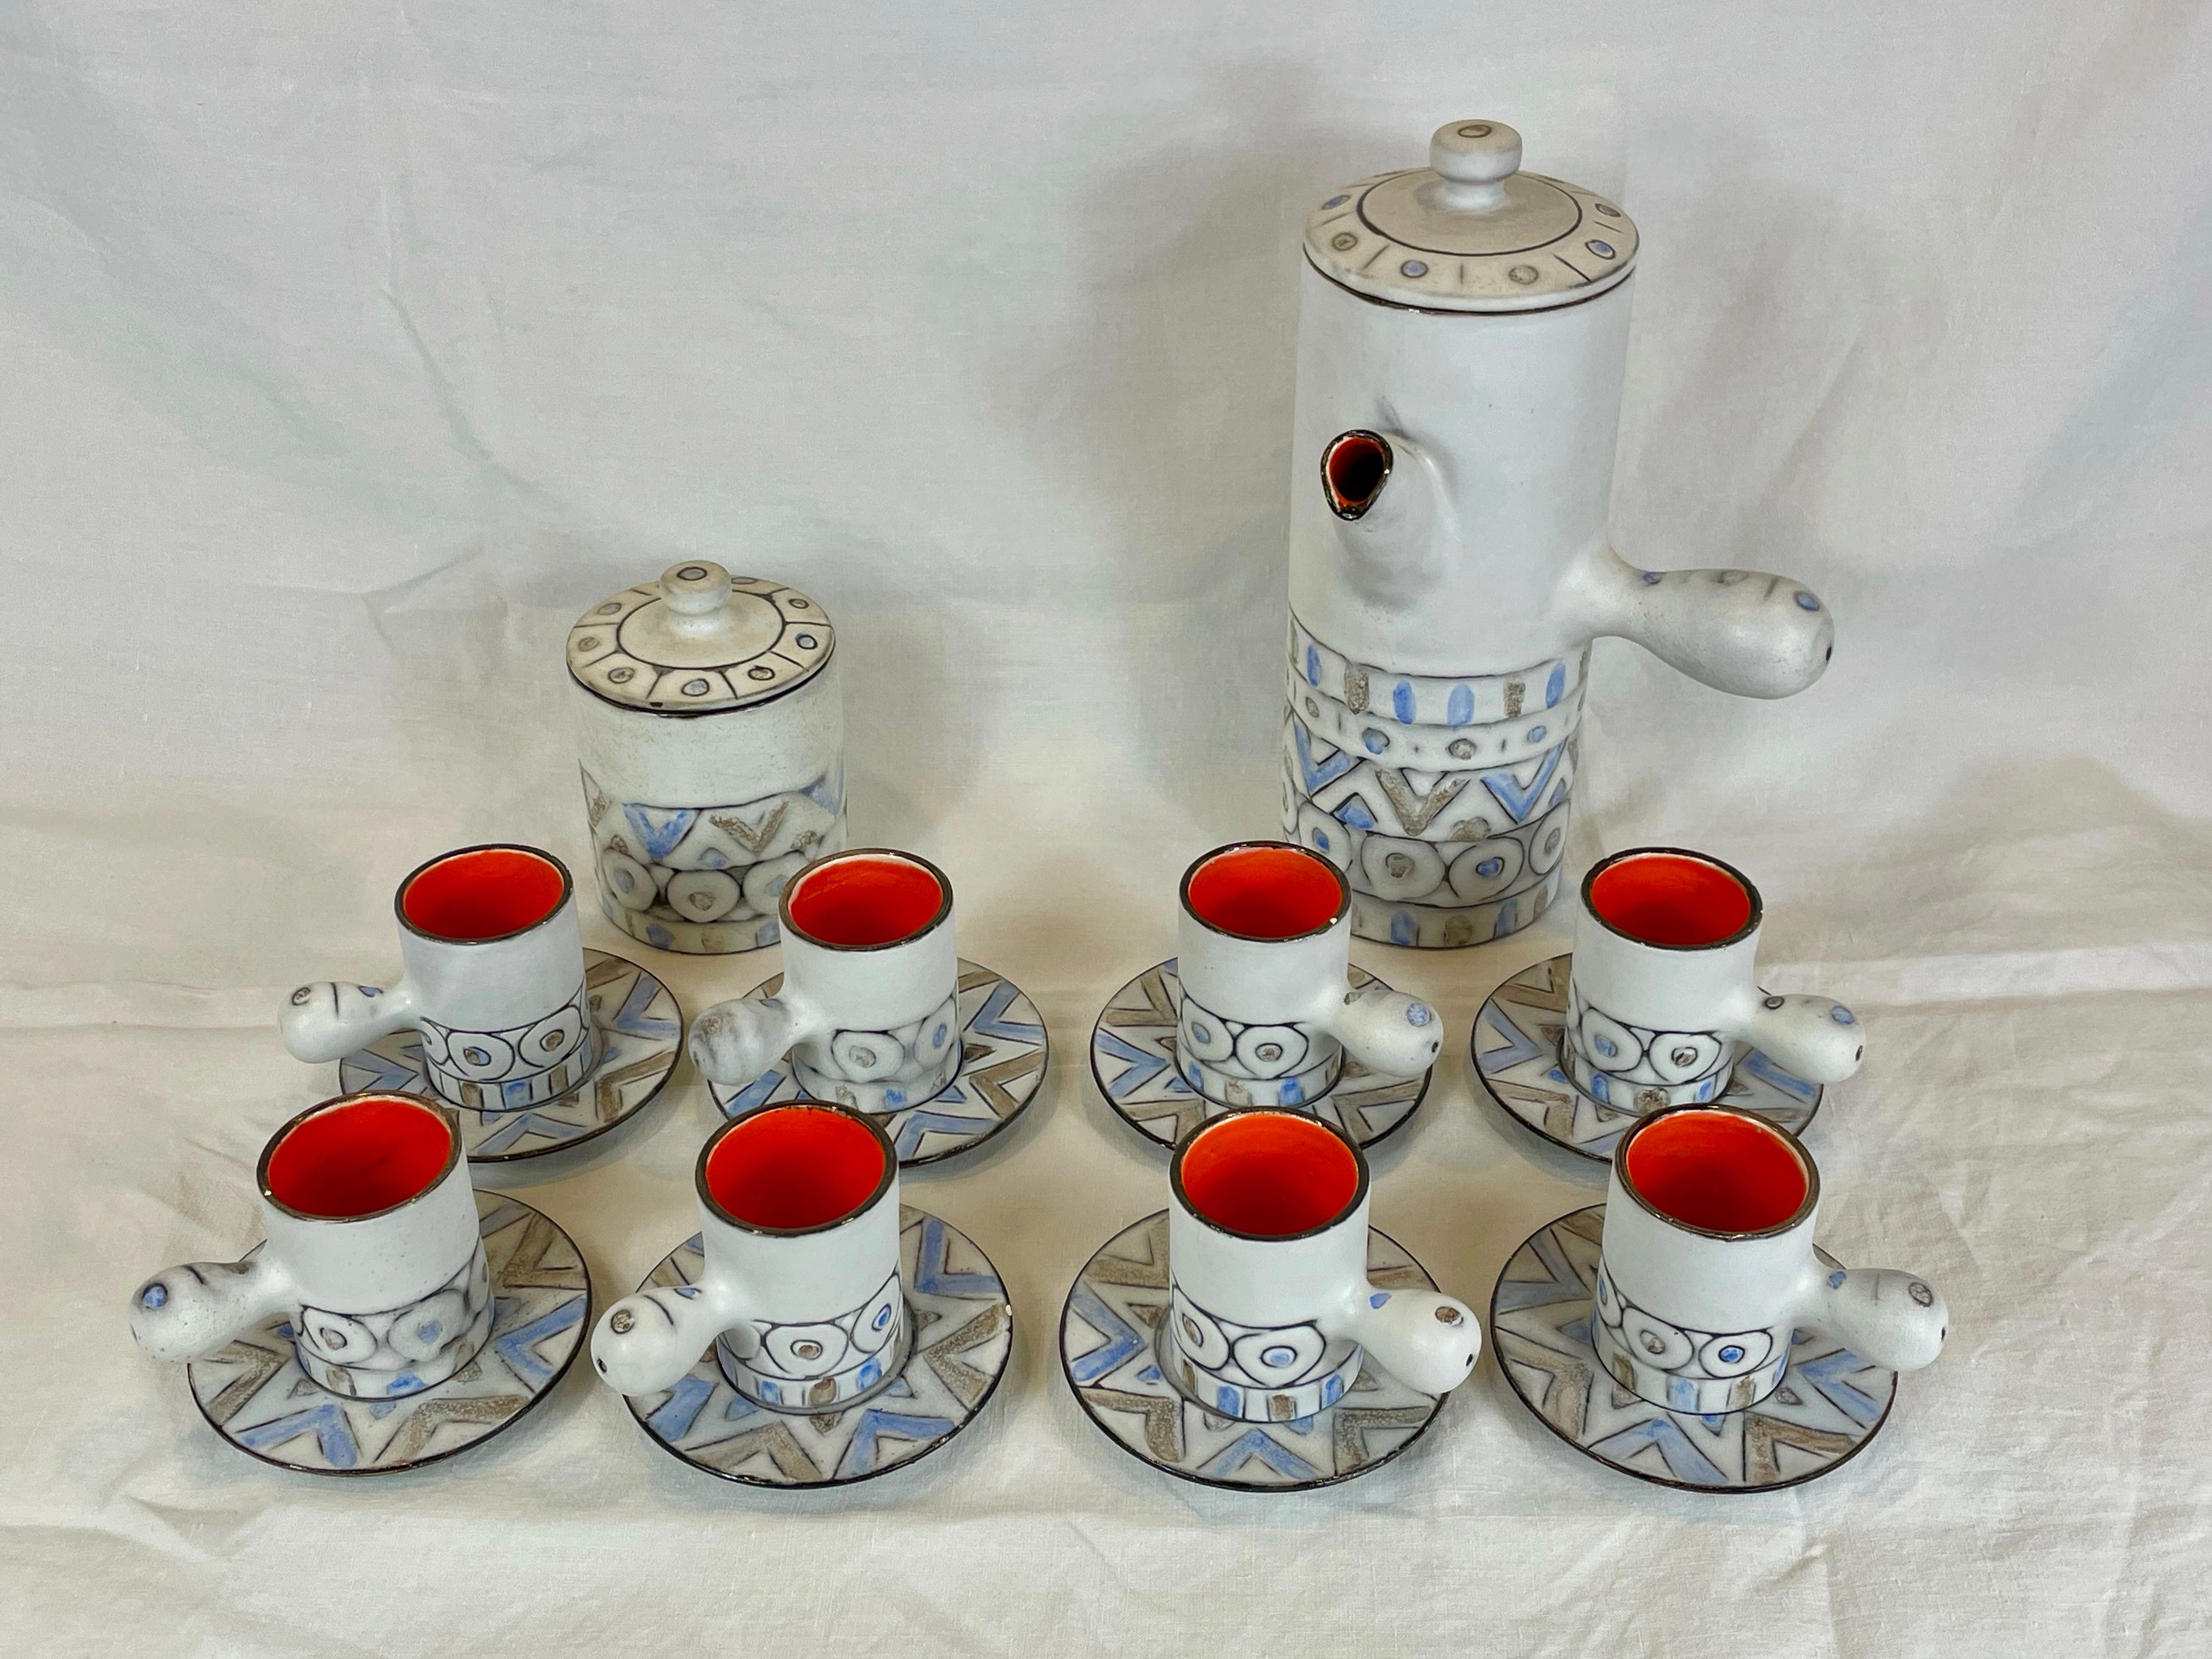 Ceramic hot chocolat set by Alain Maunier of Vallauris.
Dating back to the 1960s this set consists of a chocolate pot, 8 cups and saucers and a sugar pot.
This beautiful set is timeless in its style with subtle colours of taupe and baby blue against